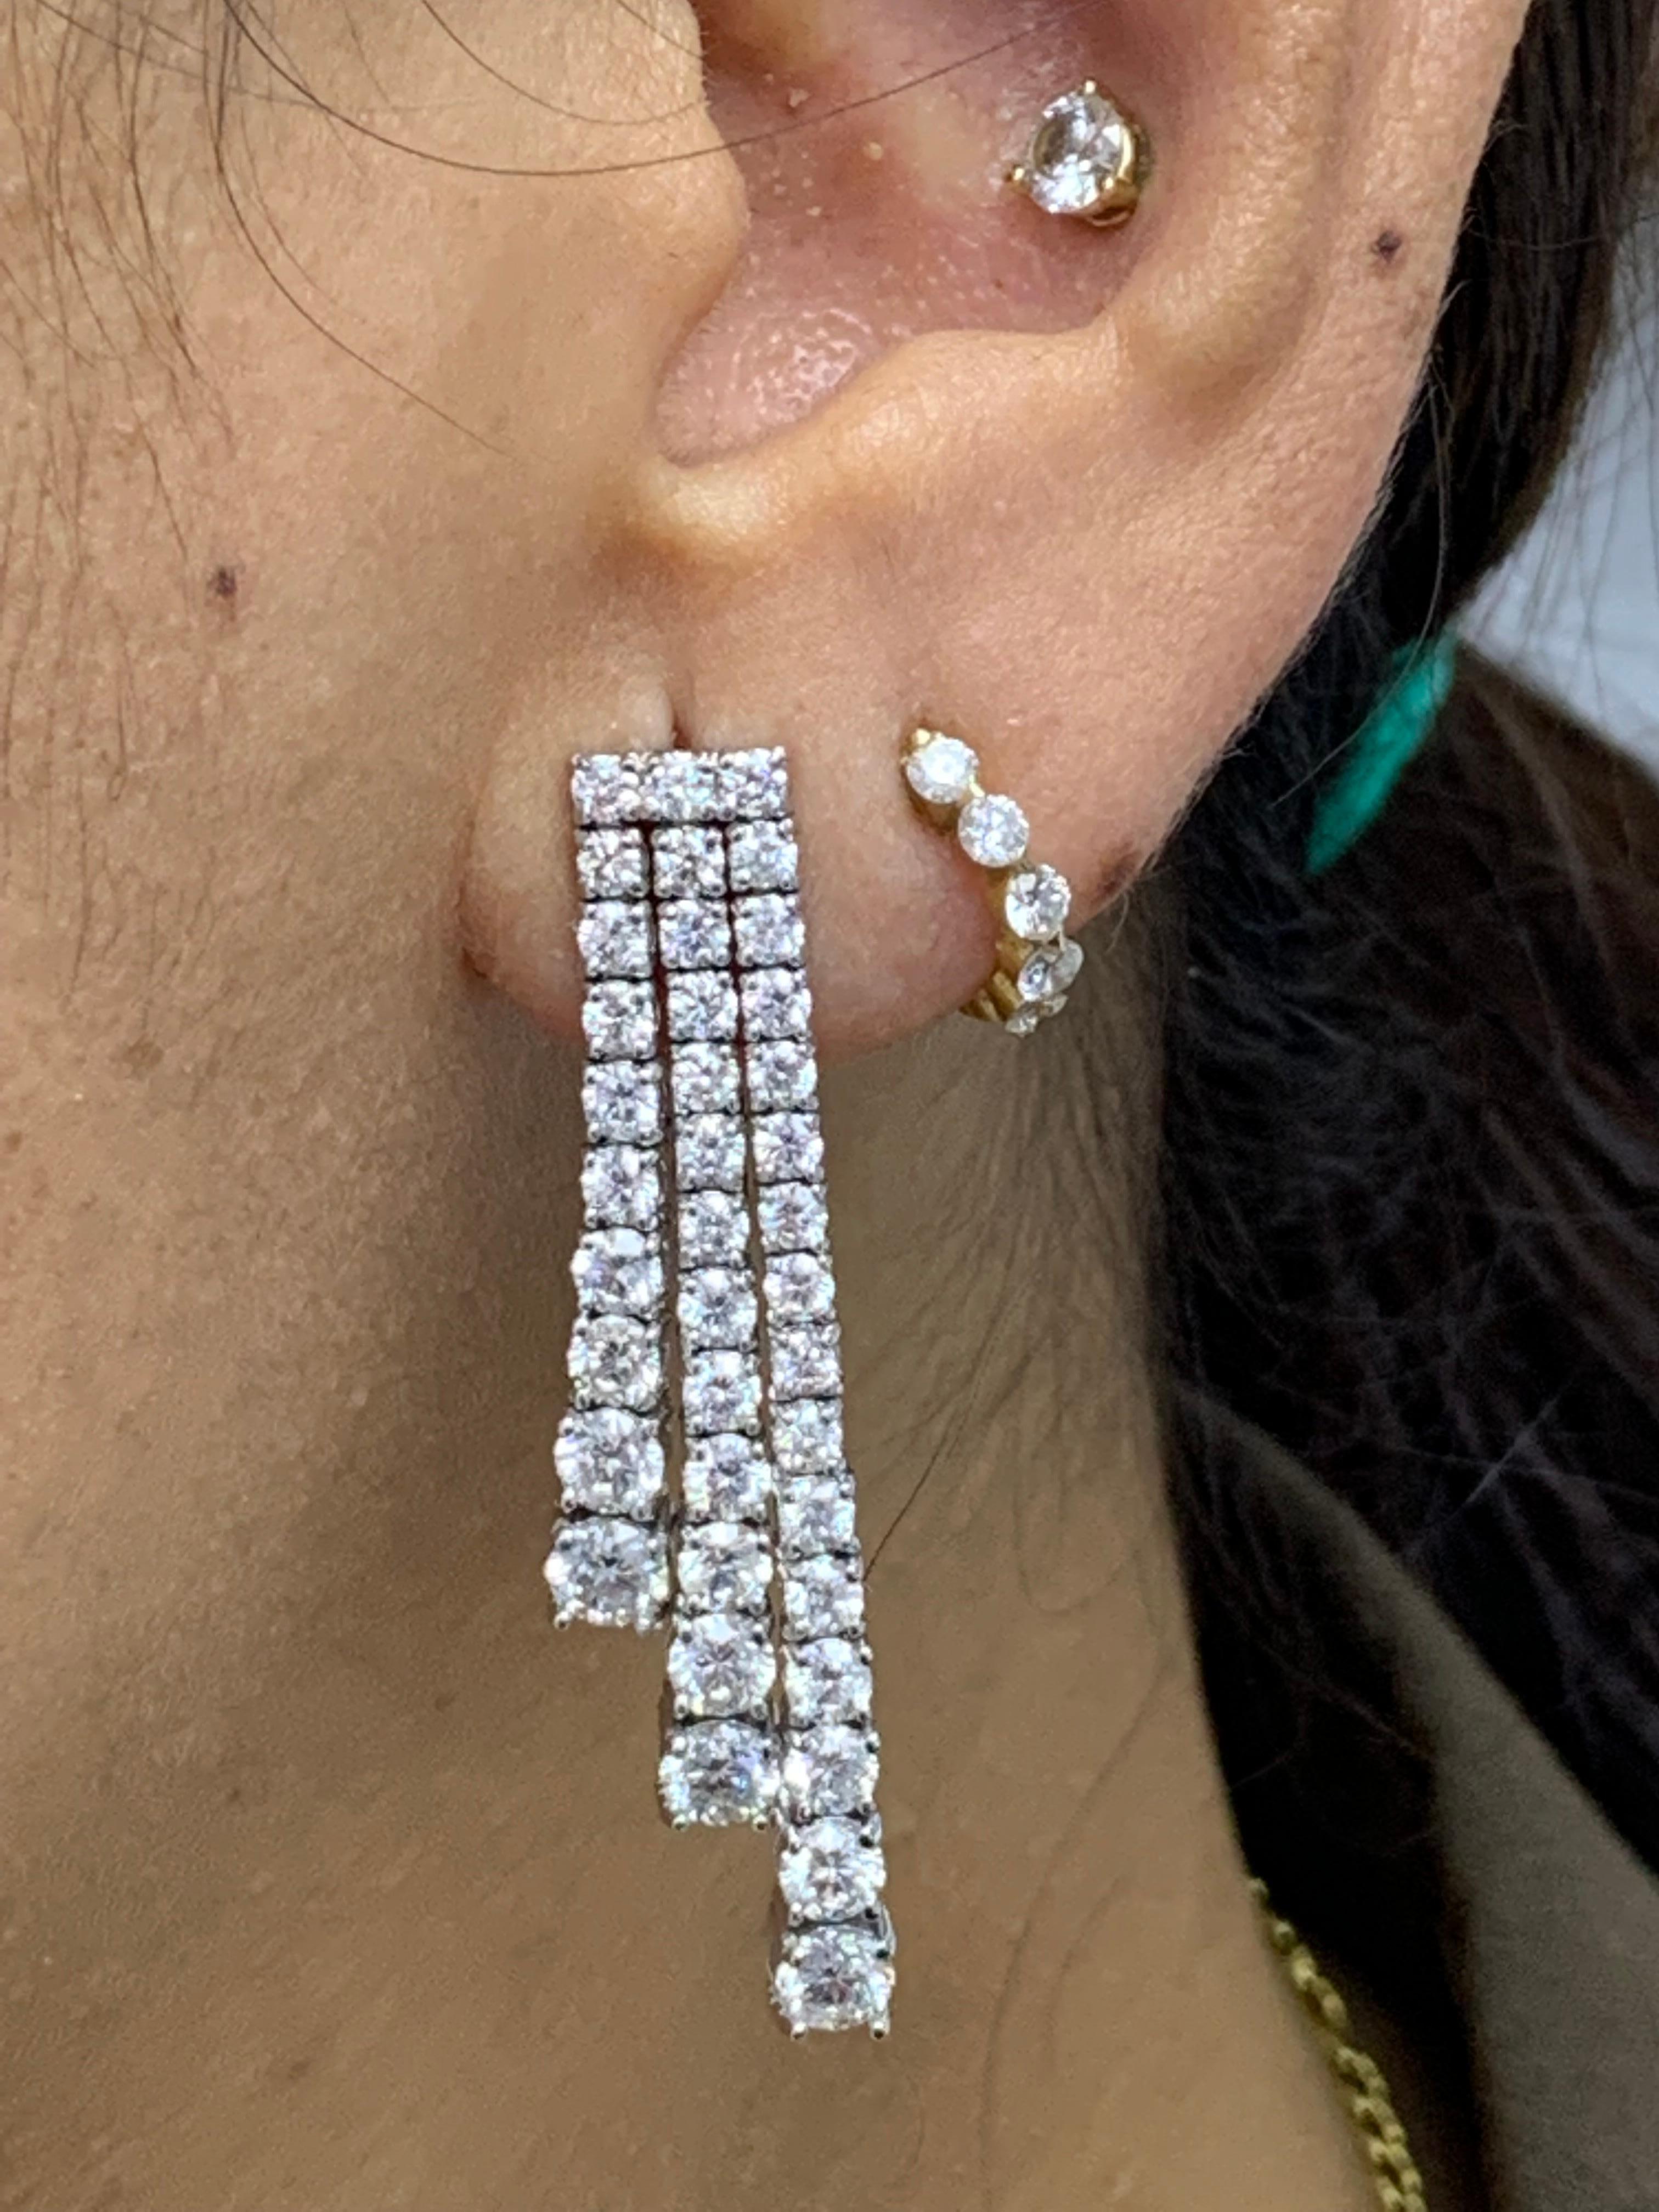 An important pair of dangle earrings showcasing three rows of 5.86 carat round brilliant diamonds. 

Style available in different price ranges. Prices are based on your selection of the 4C’s (Carat, Color, Clarity, Cut). Please contact us for more